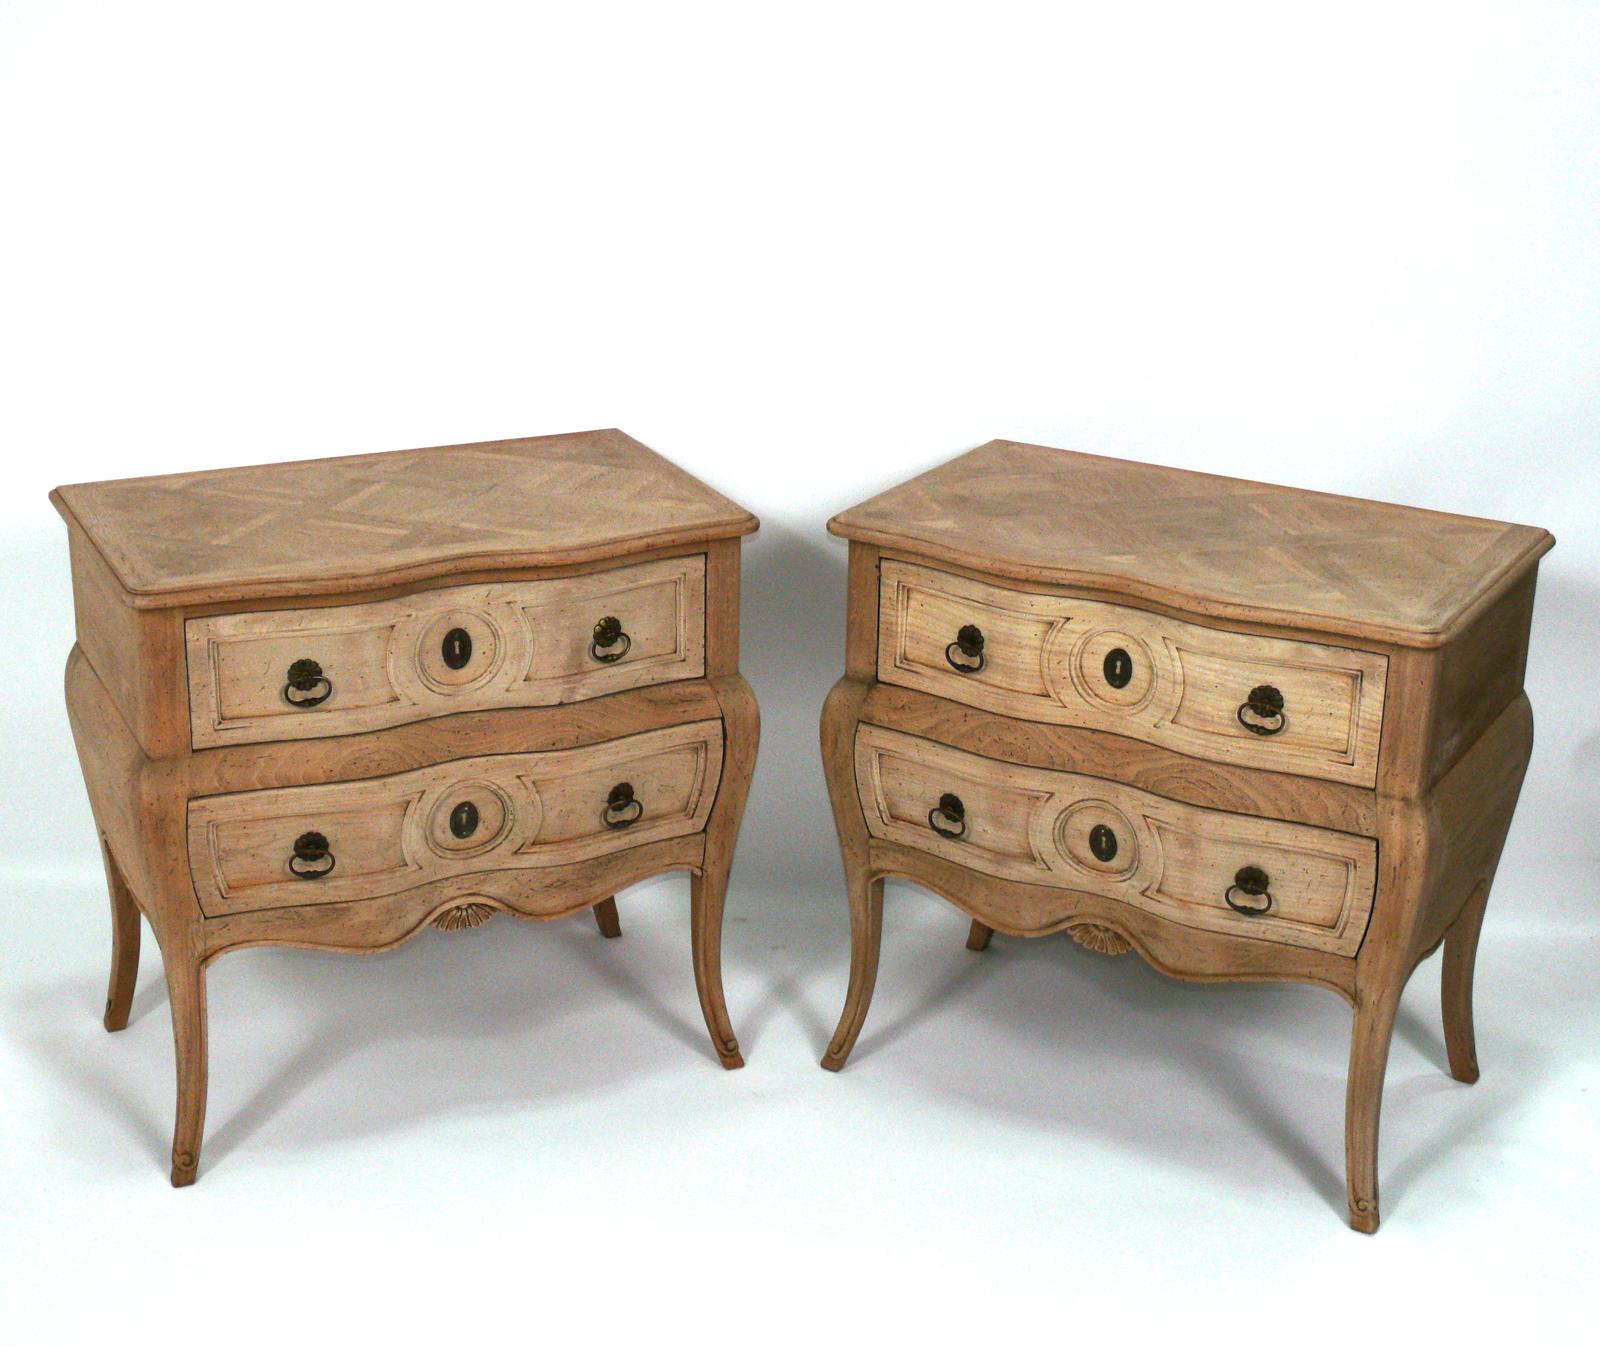 Pair of elegant French bleached oak parquet nightstands, France, circa 1950s. These are a versatile size and can be used as nightstands, or as end or side tables. They were imported by Auffray and Company of New York City.